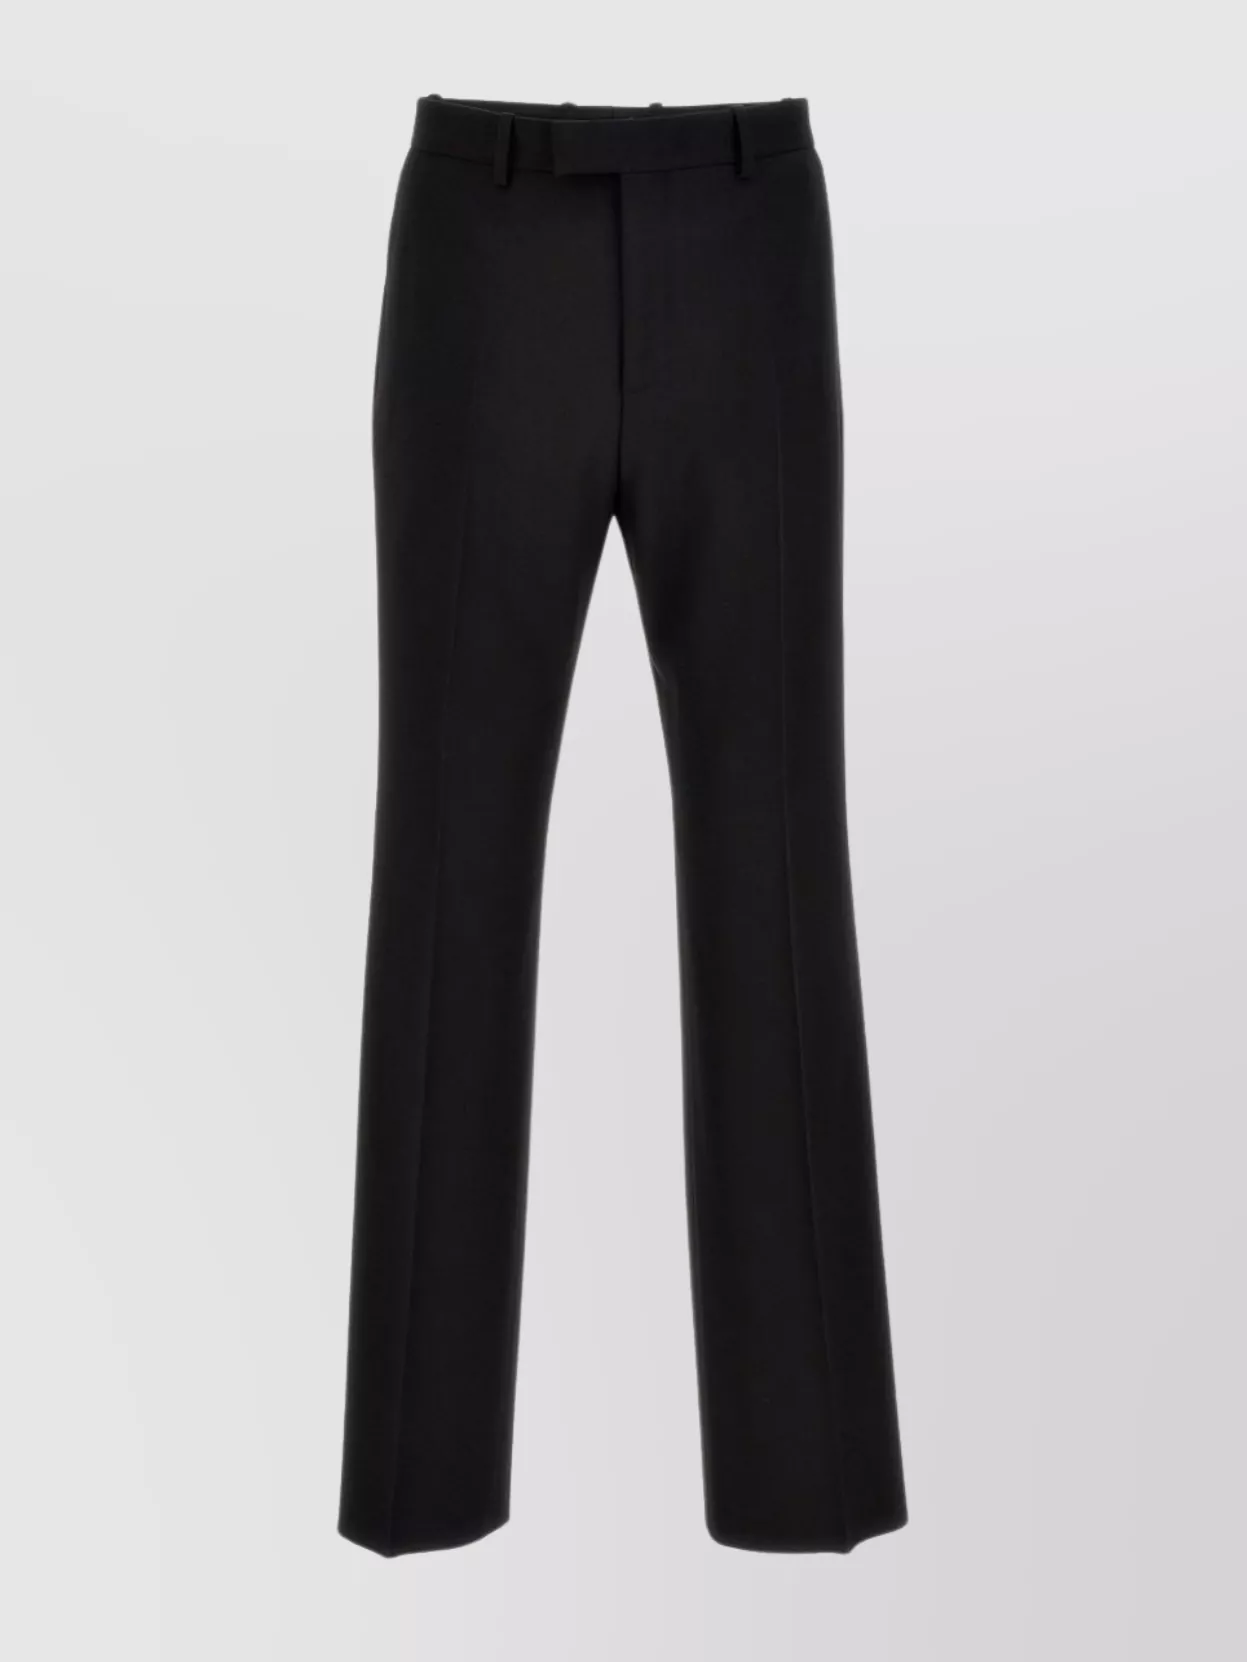 Ferragamo Wool Trousers With Back Pocket And Front Crease